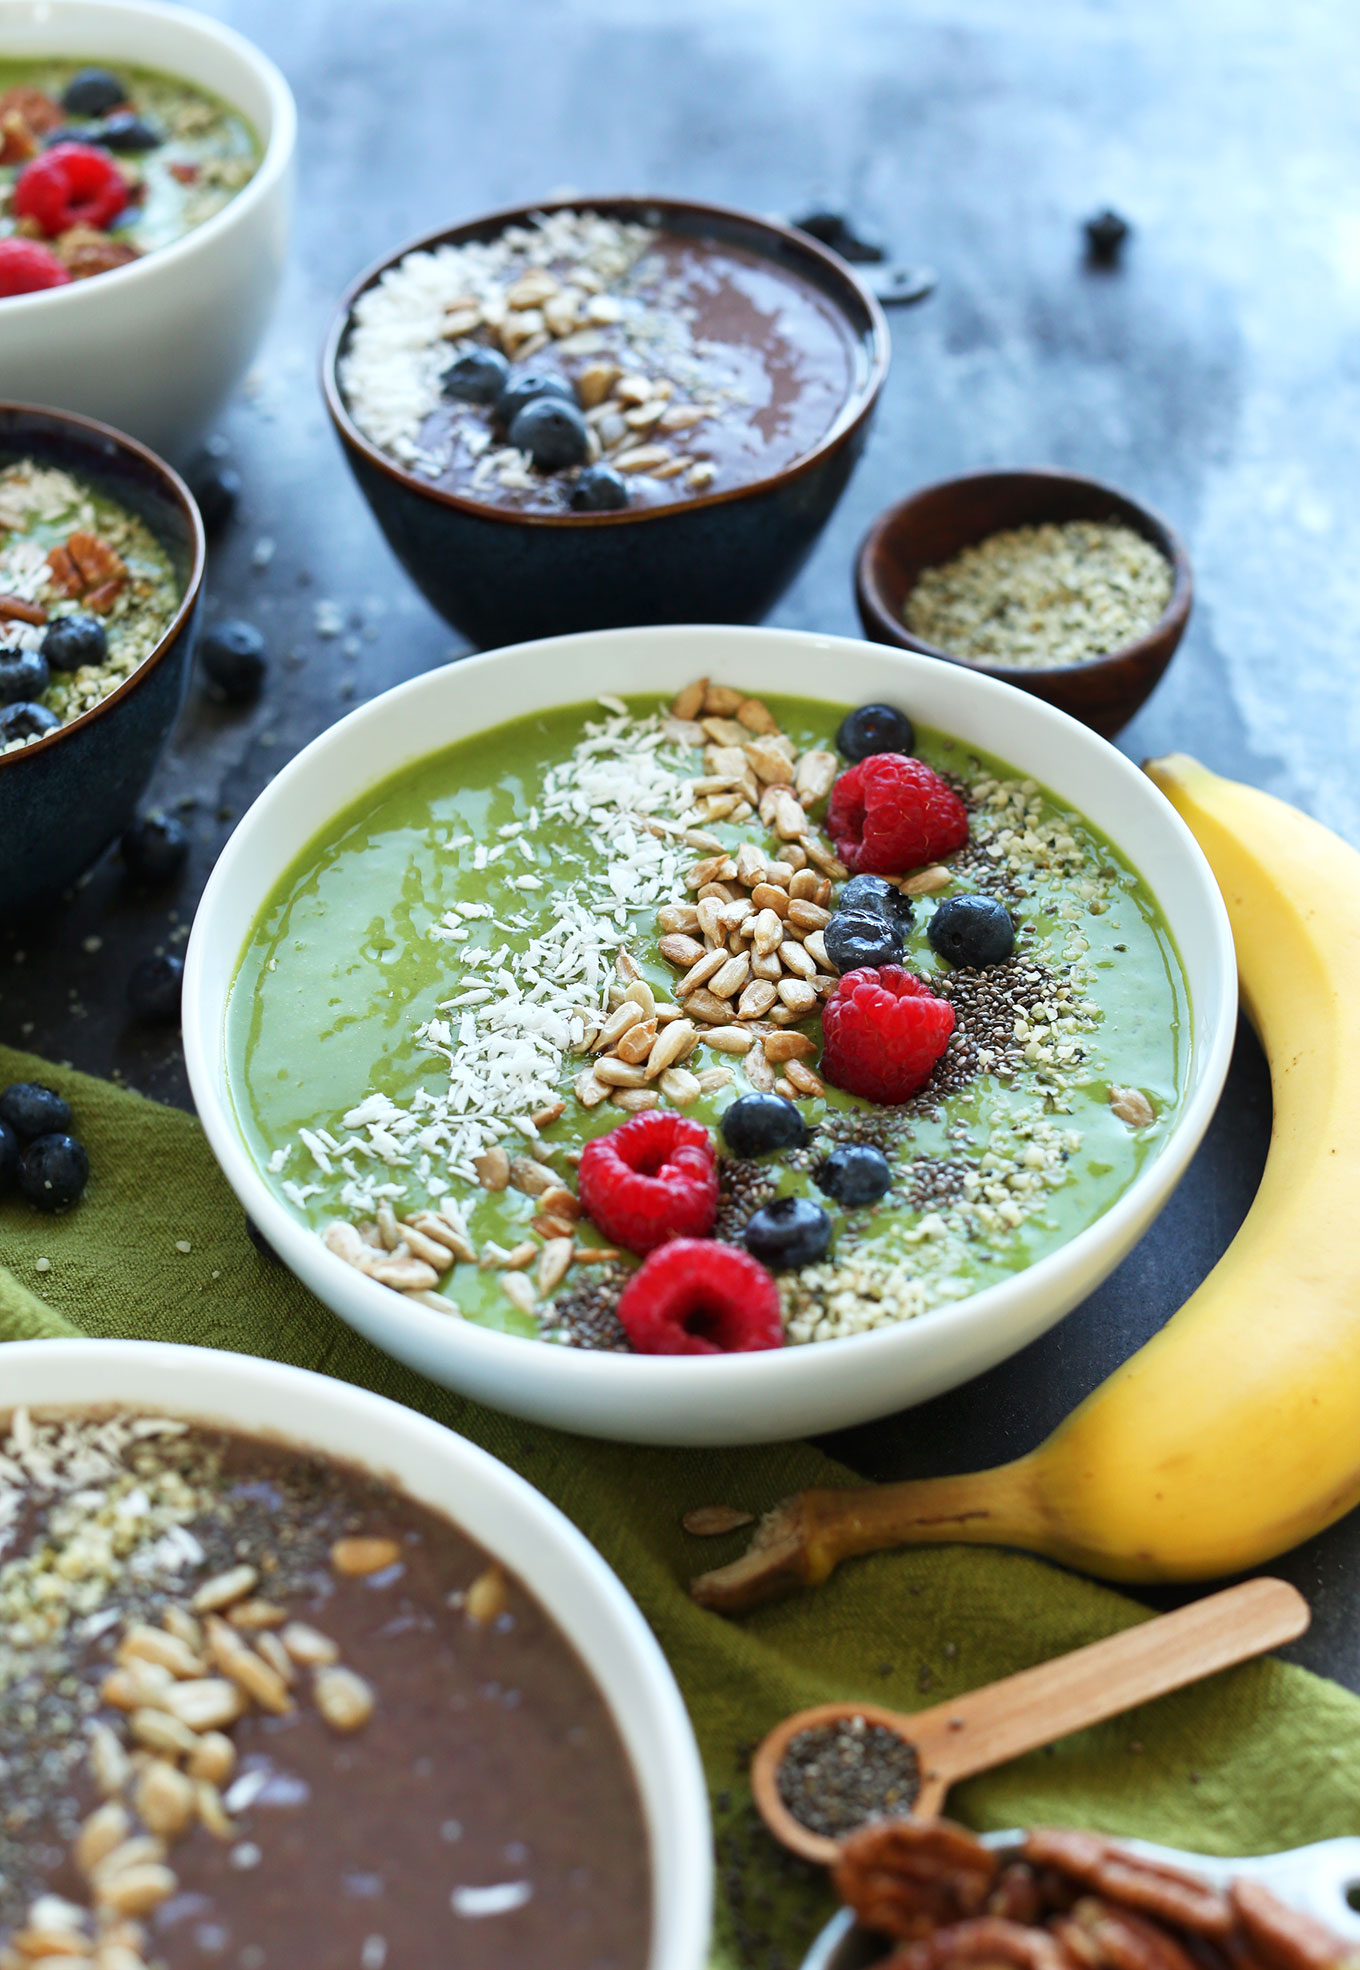 SUPER-Green-SMOOTHIE-BOWLS-A-healthy-way-to-make-a-smoothie-a-meal-vegan-glutenfree-healthy-minimalistbaker